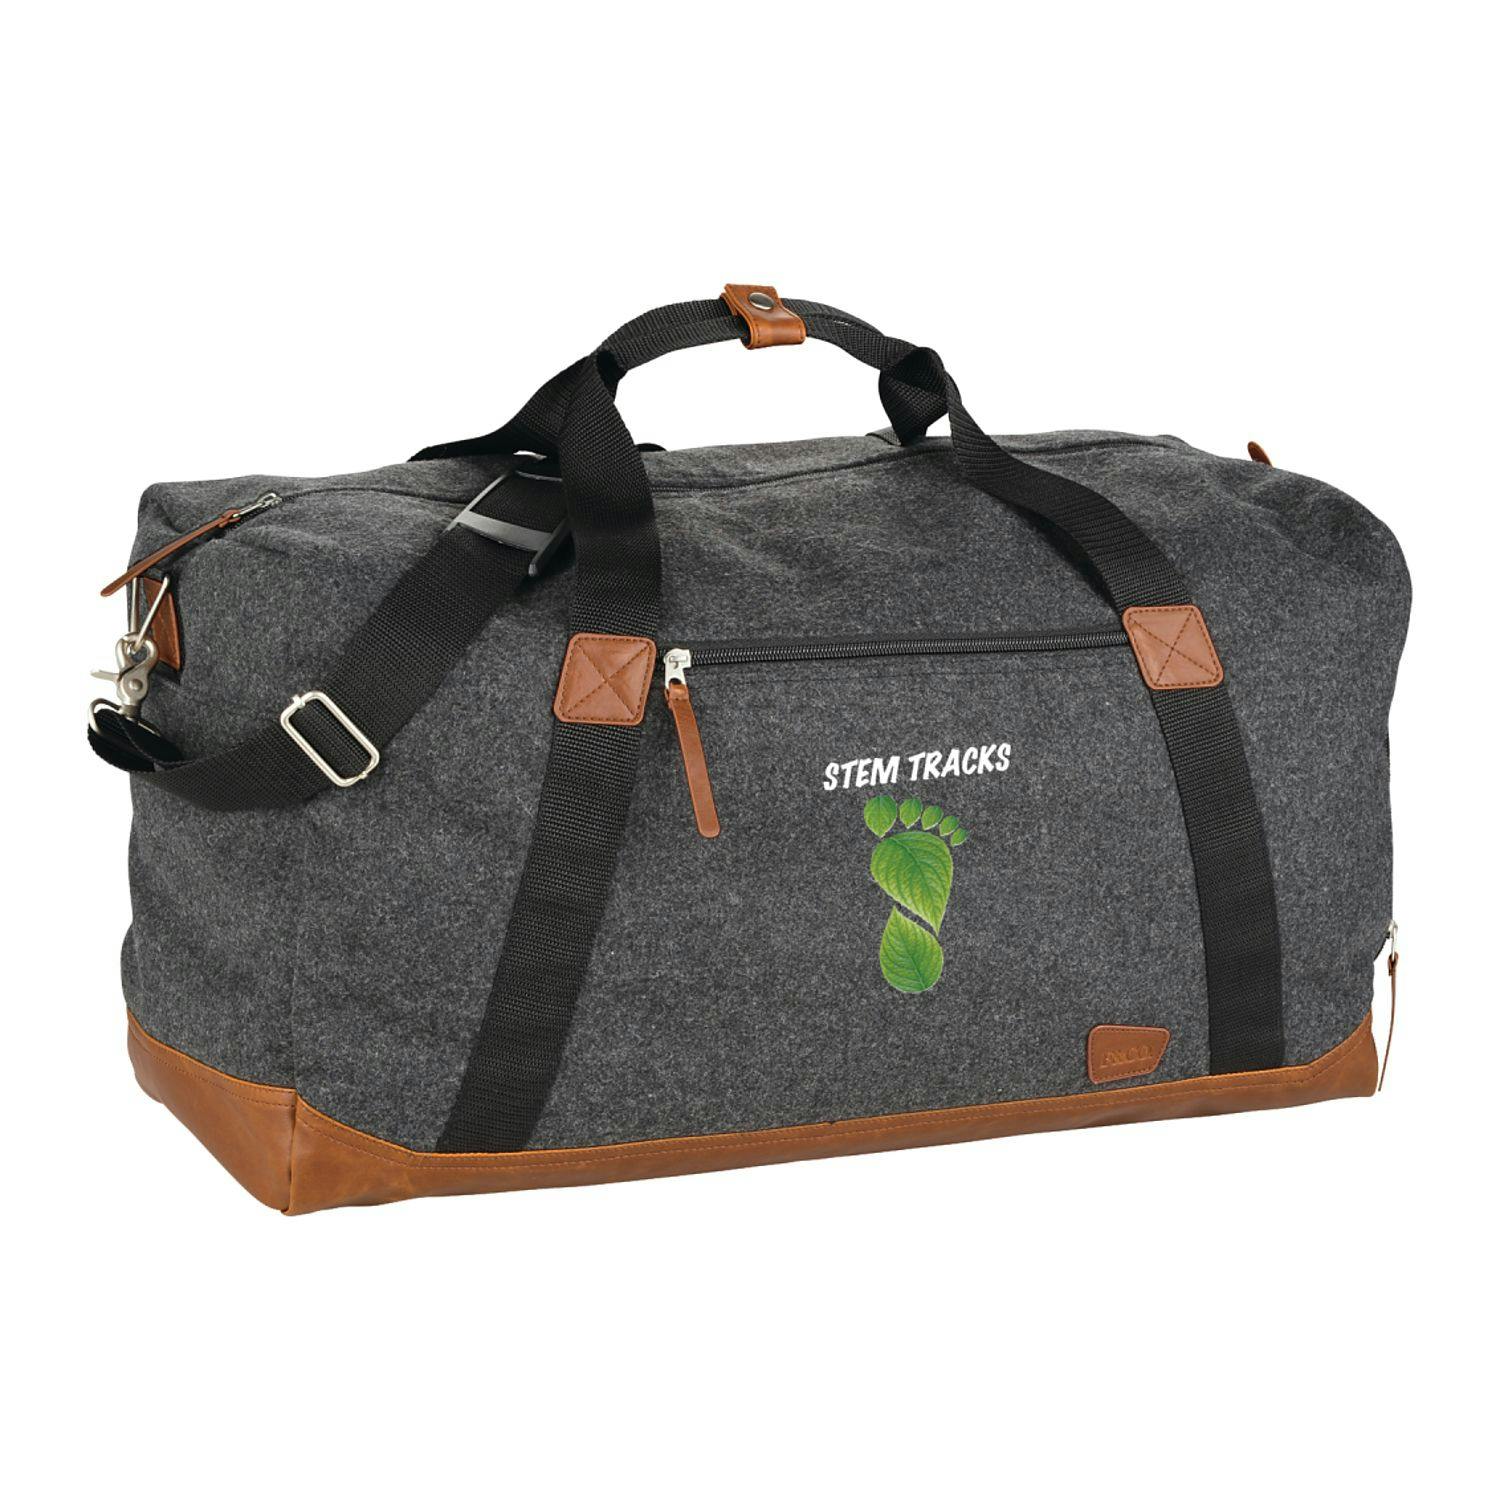 CAMO Trendy Realtree Camouflage Duffel Bag Gym Hunting Camping